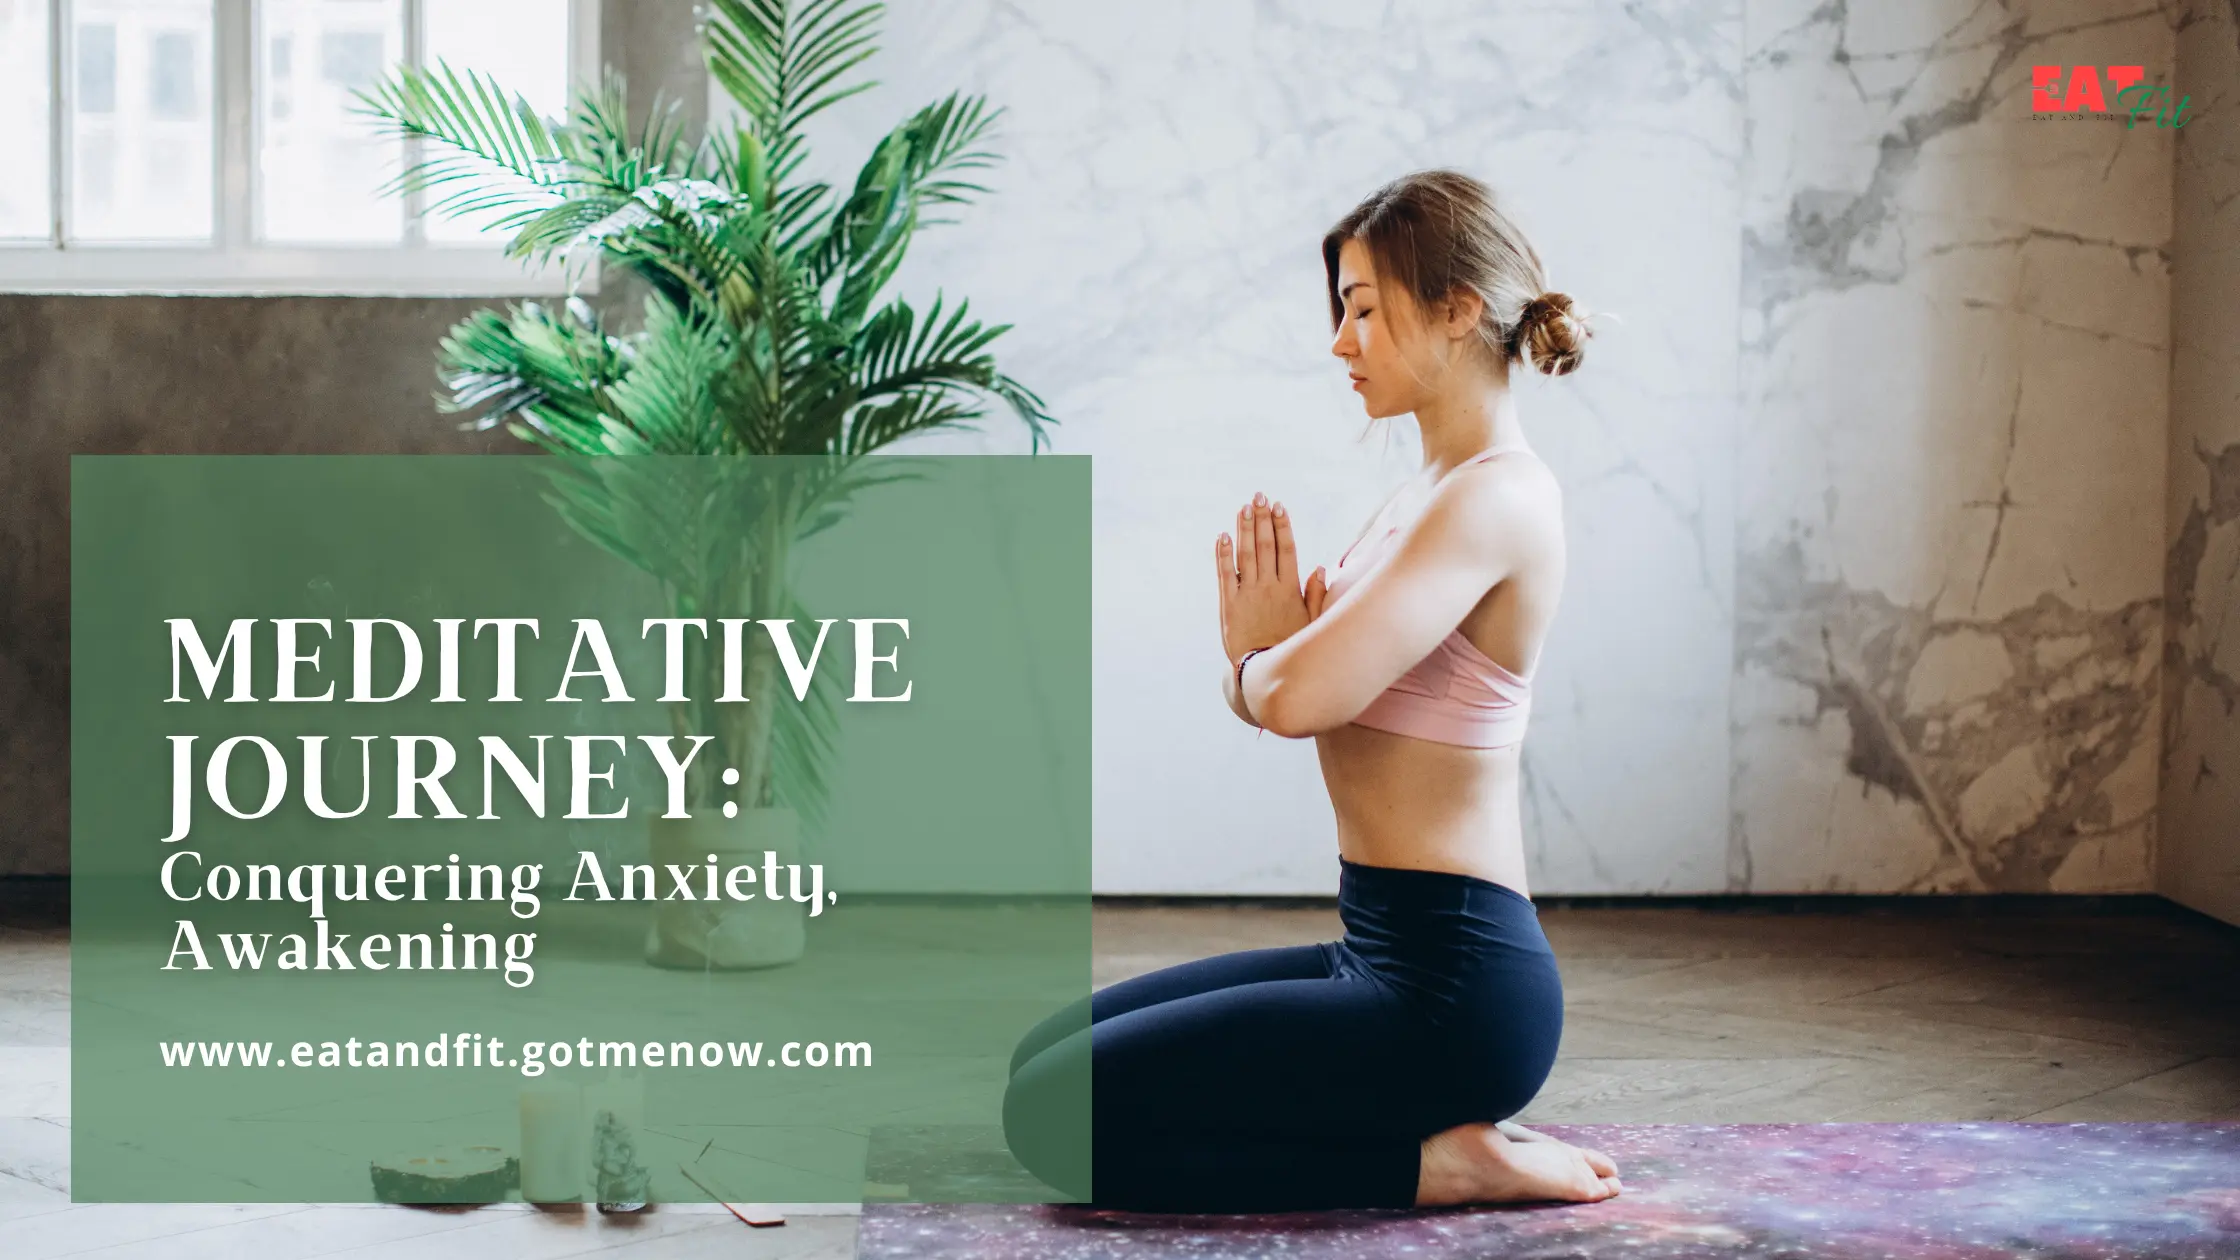 My Journey with Meditation: Overcoming Anxiety and Awakening